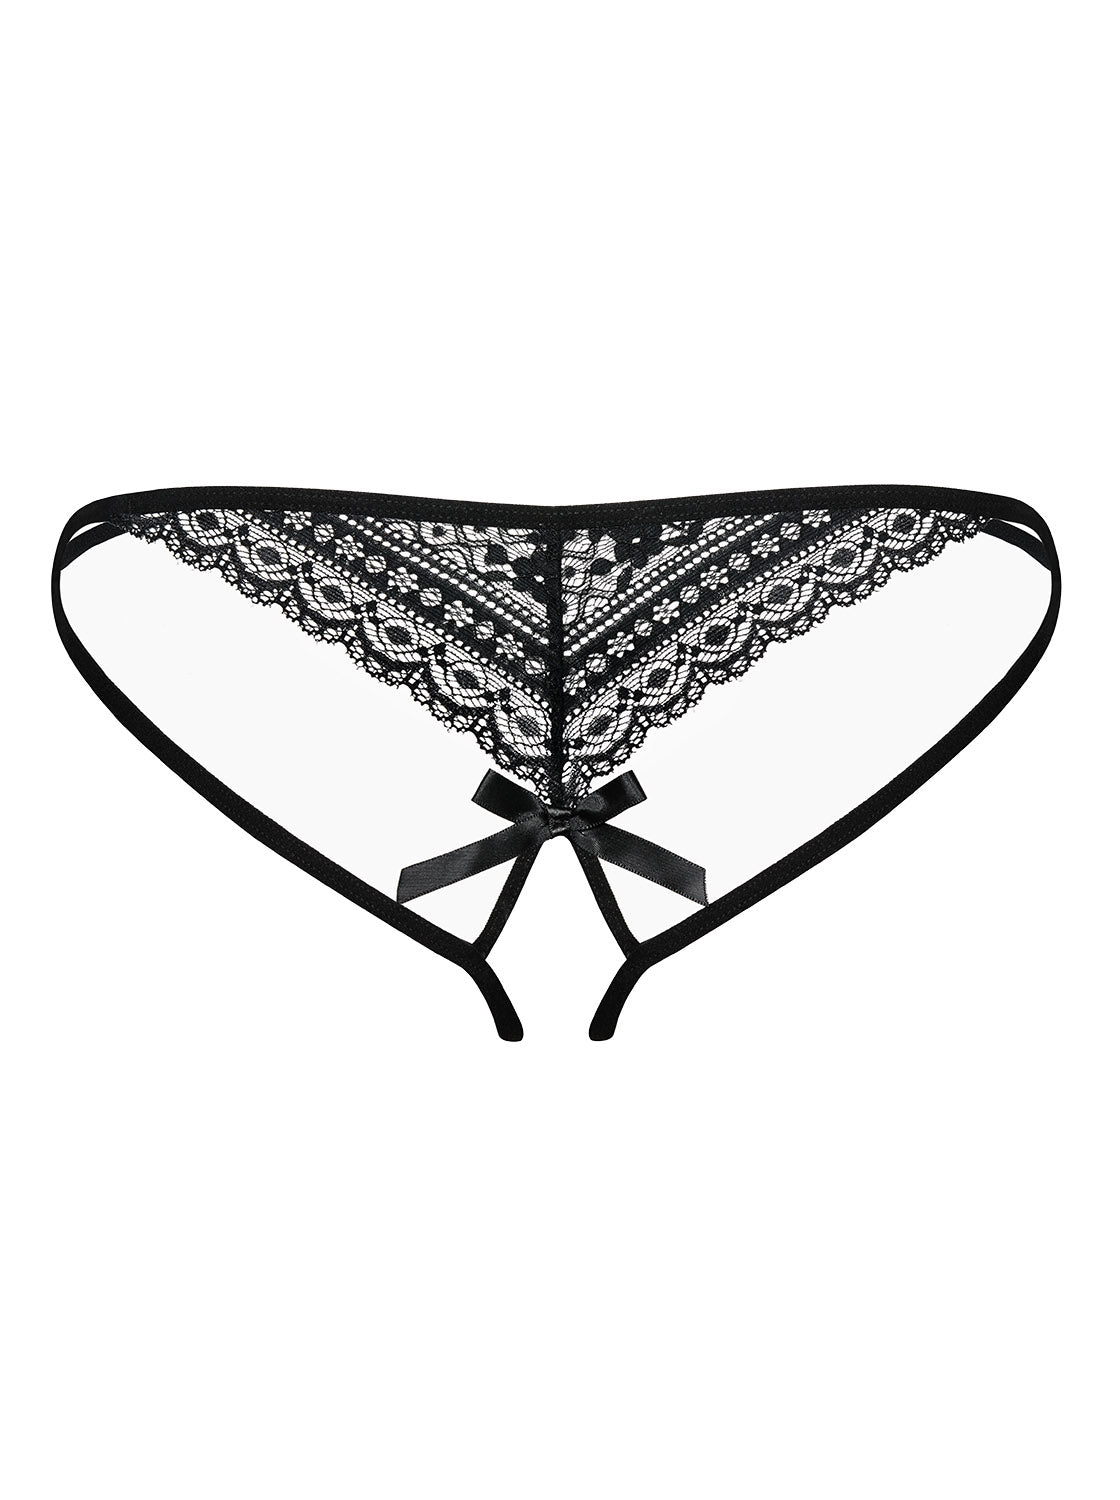 Picantina Open Lace String Tanga